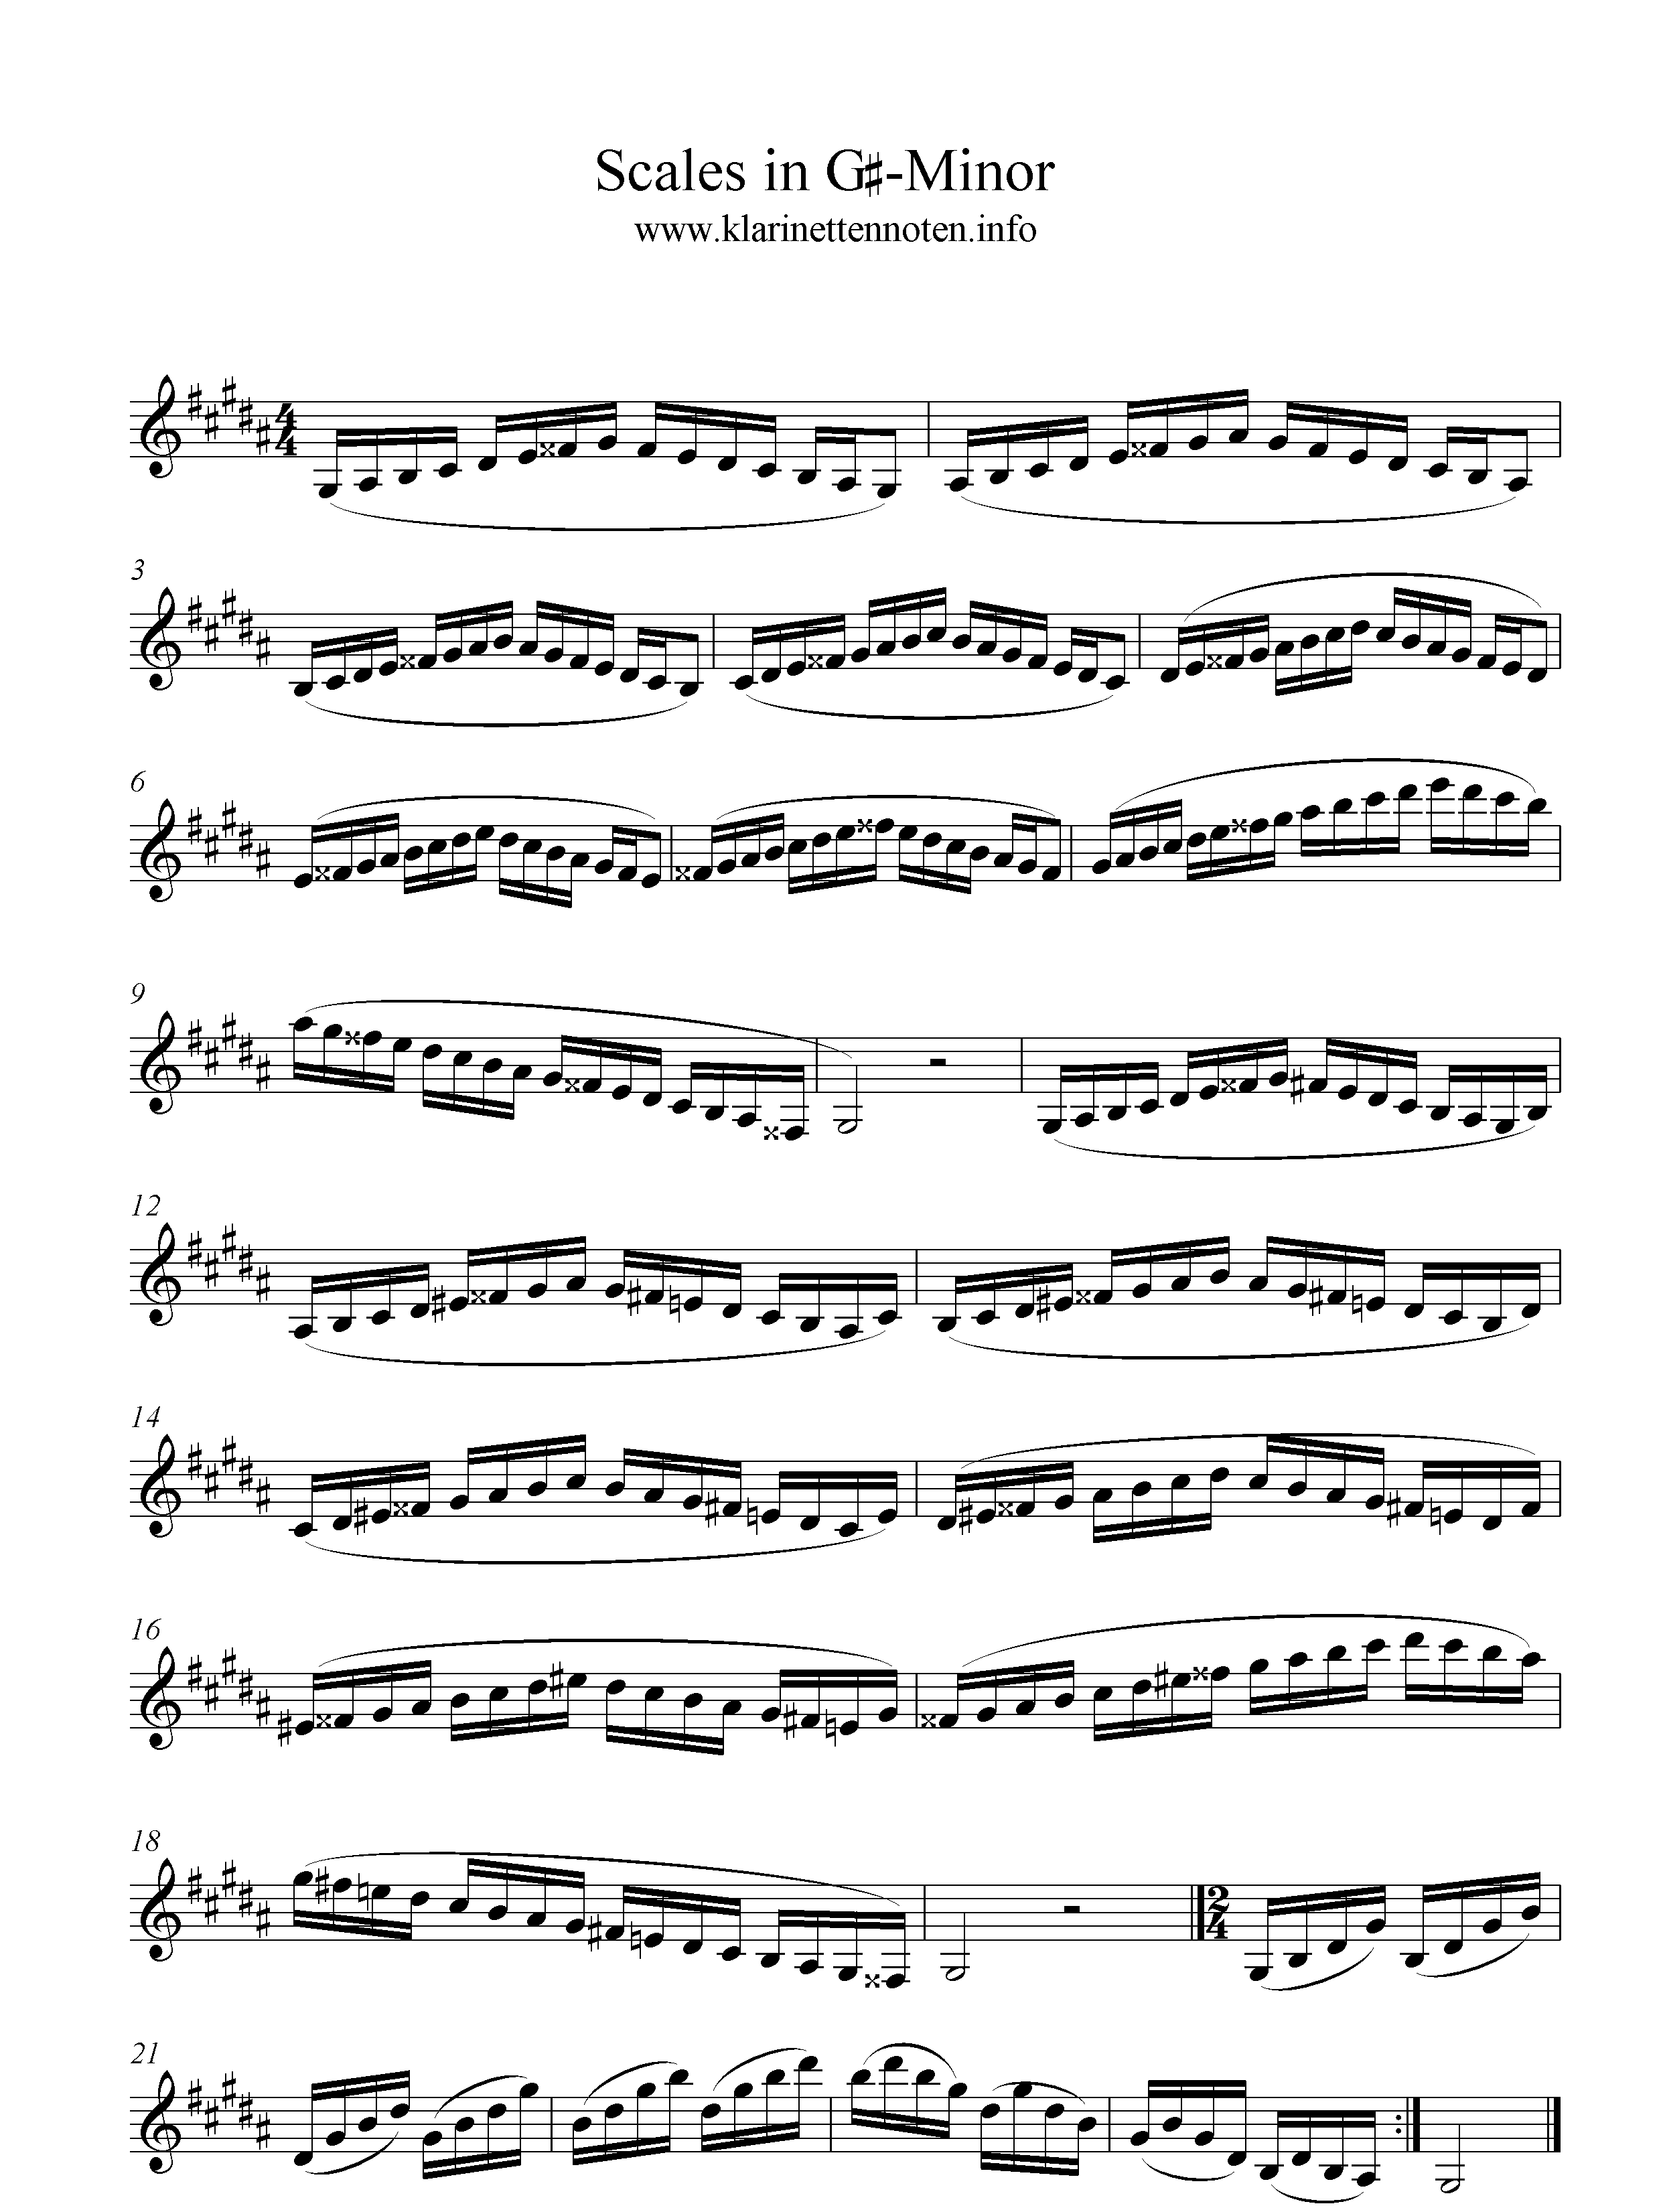 G#-minor Scales for Clarinet